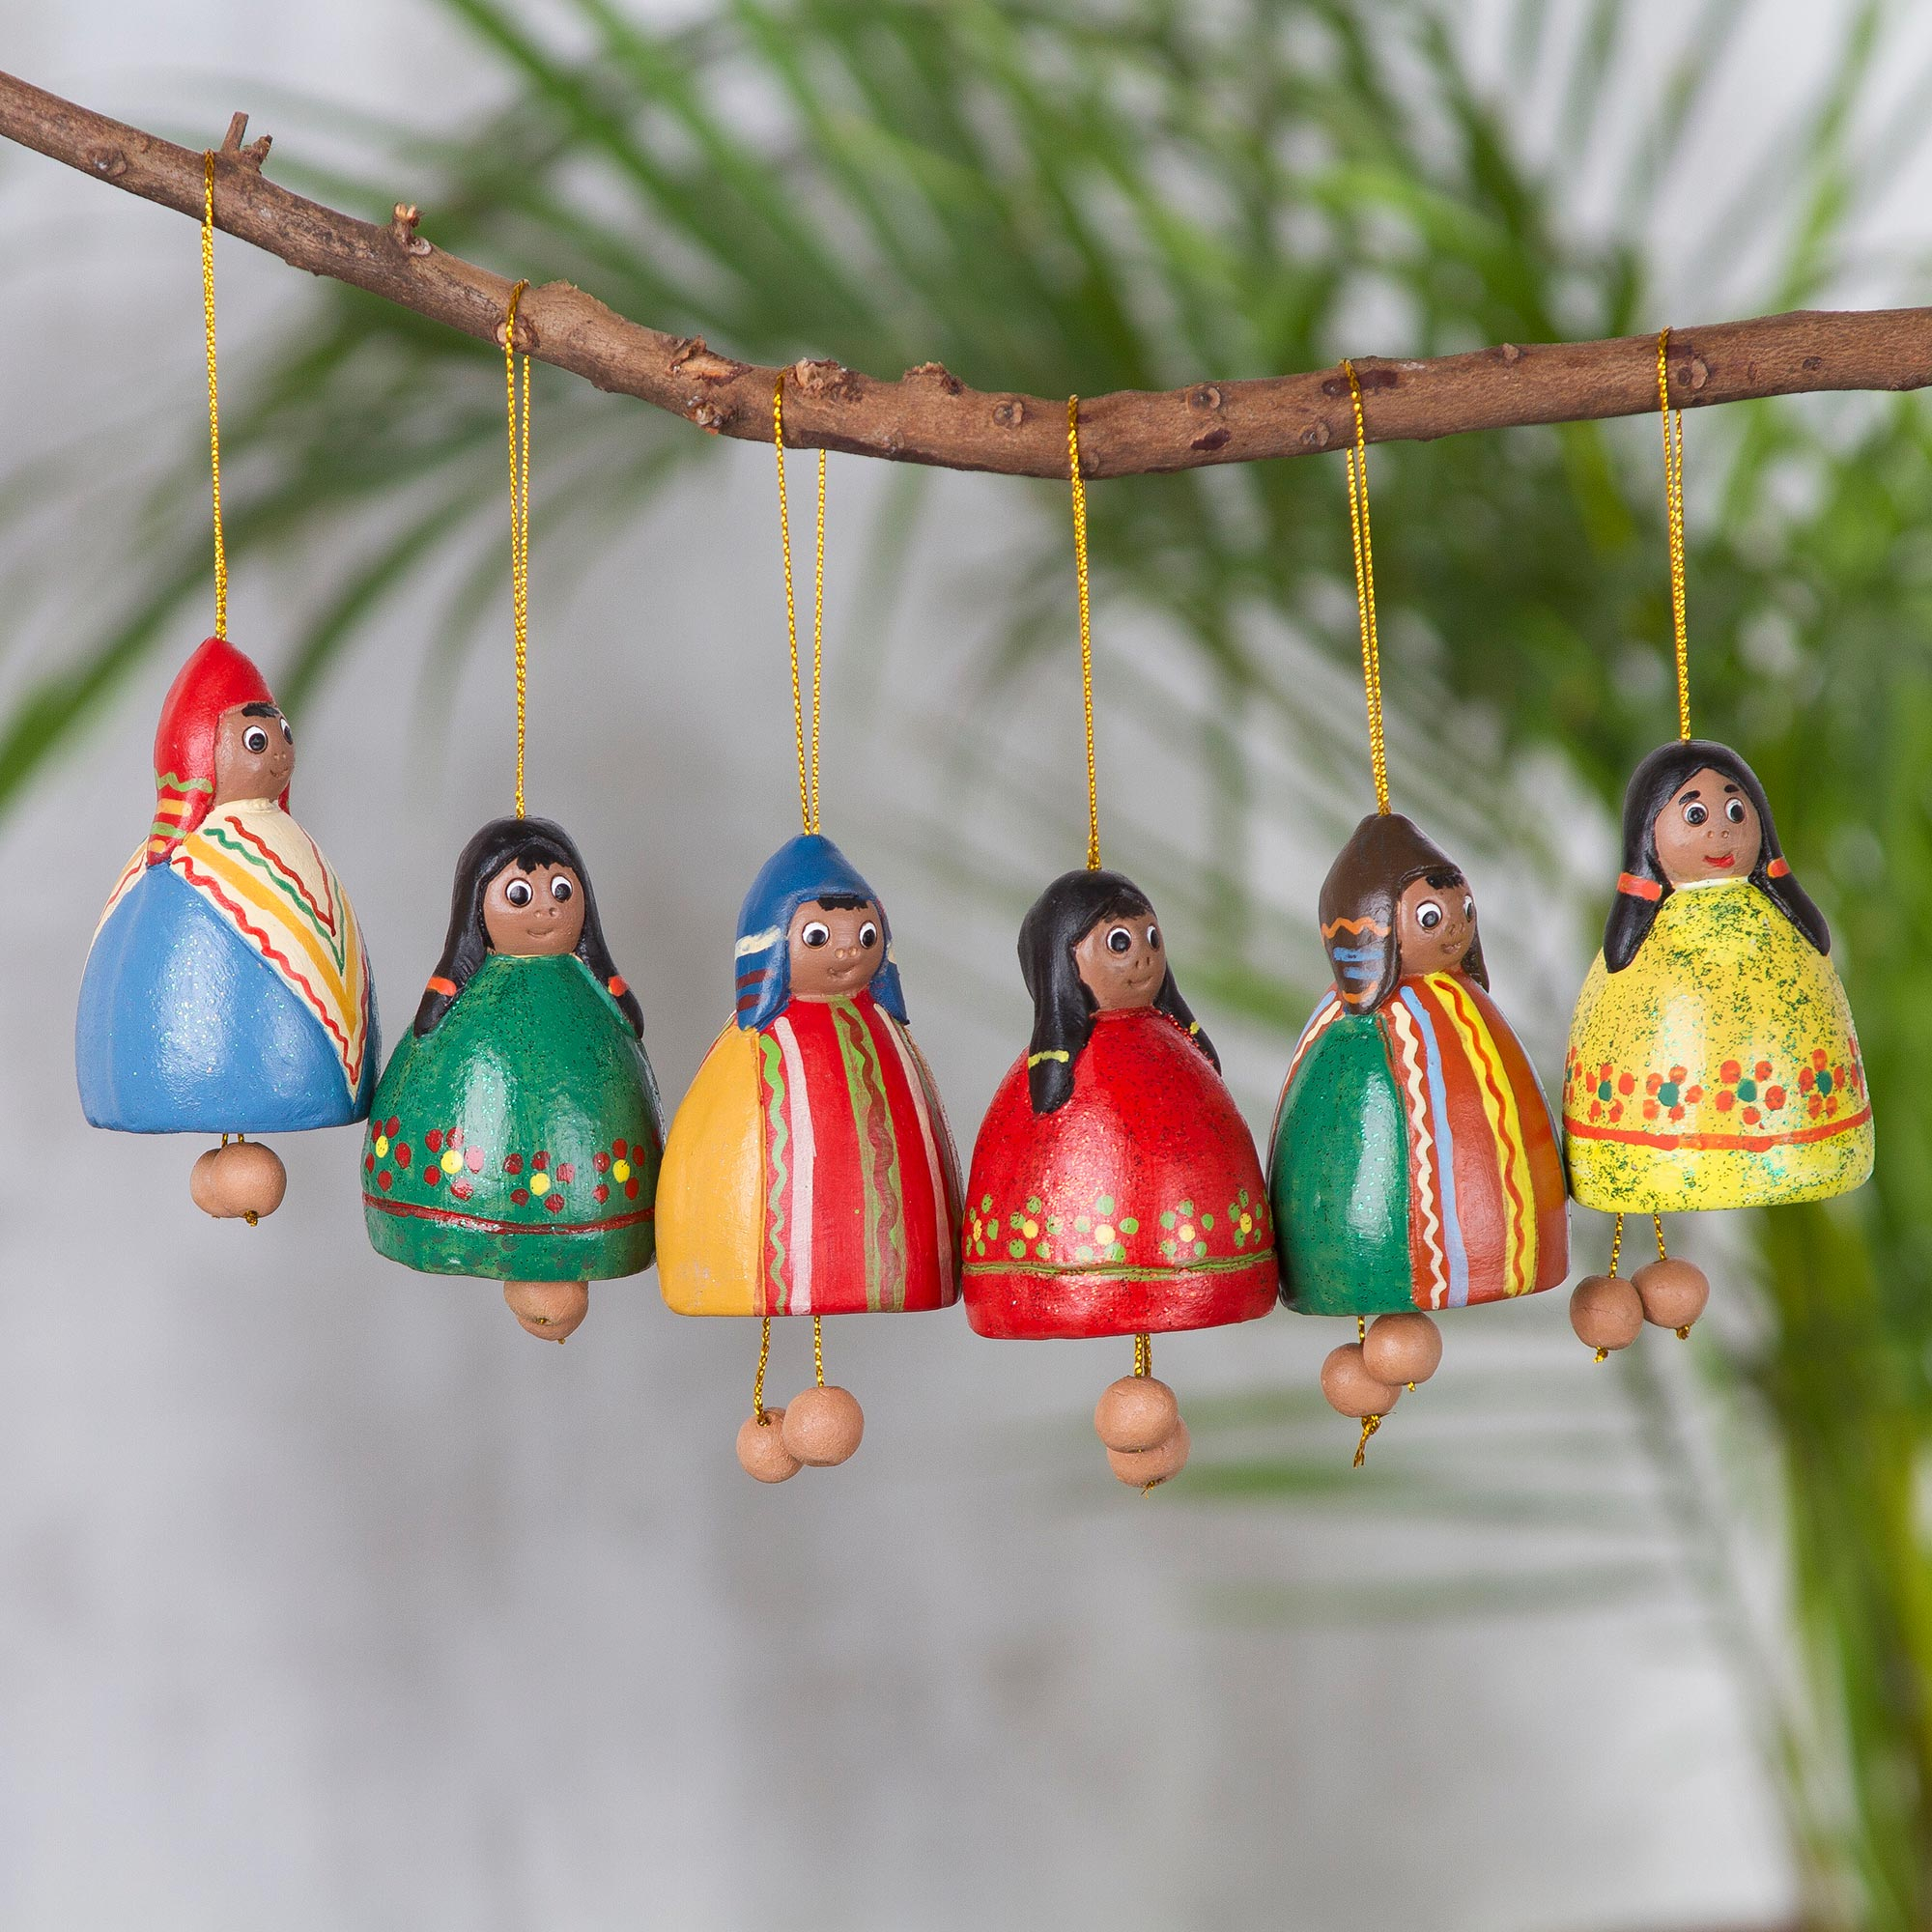 Set of Six Handcrafted Ceramic Bell Ornaments from Peru, 'Enchanting Bells'